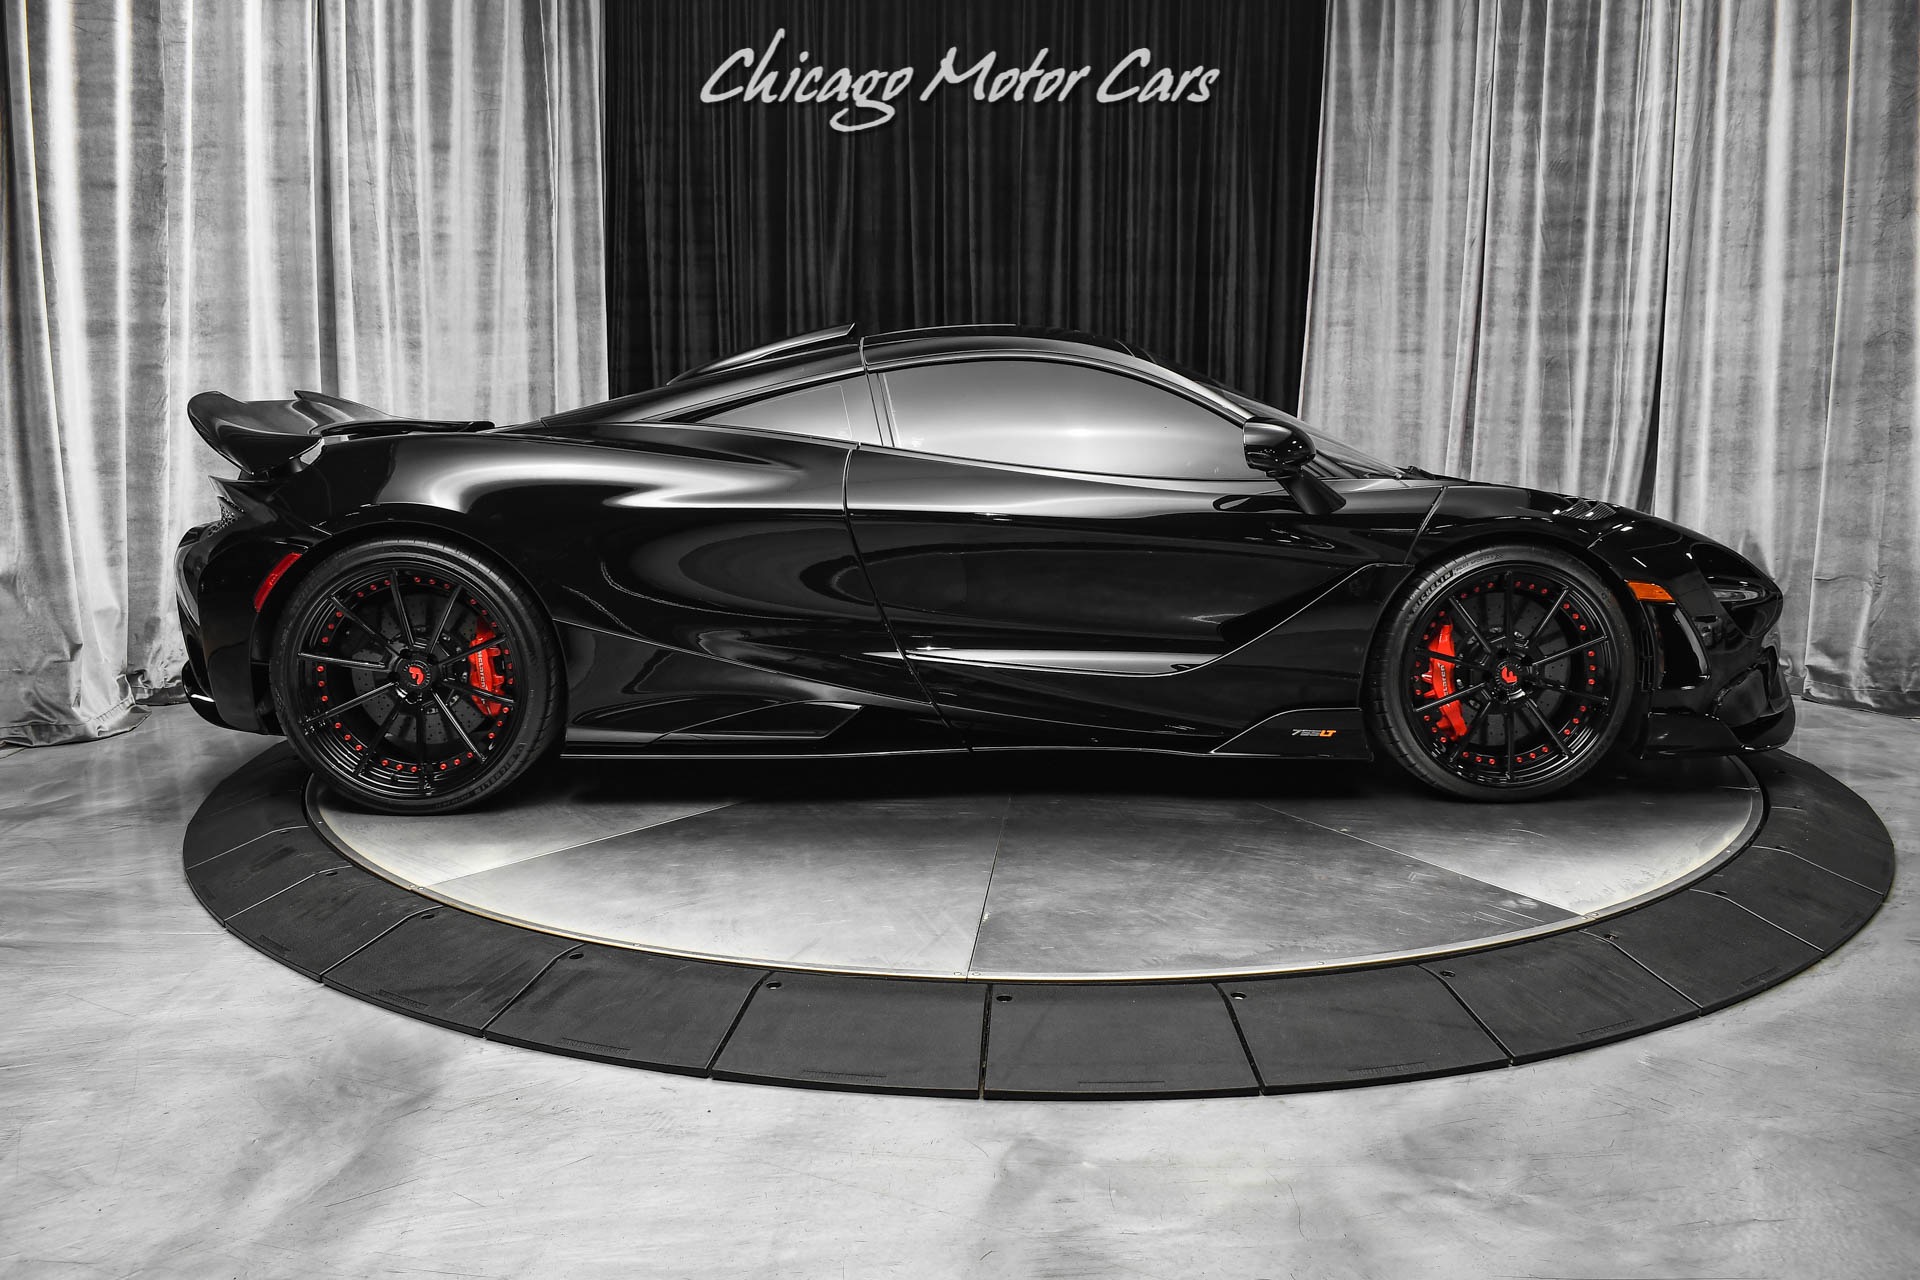 Used-2021-Mclaren-765LT-Coupe-HARD-LOADED-Ton-of-MSO-Options-Factory-ROOF-SCOOP-HIGH-MSRP